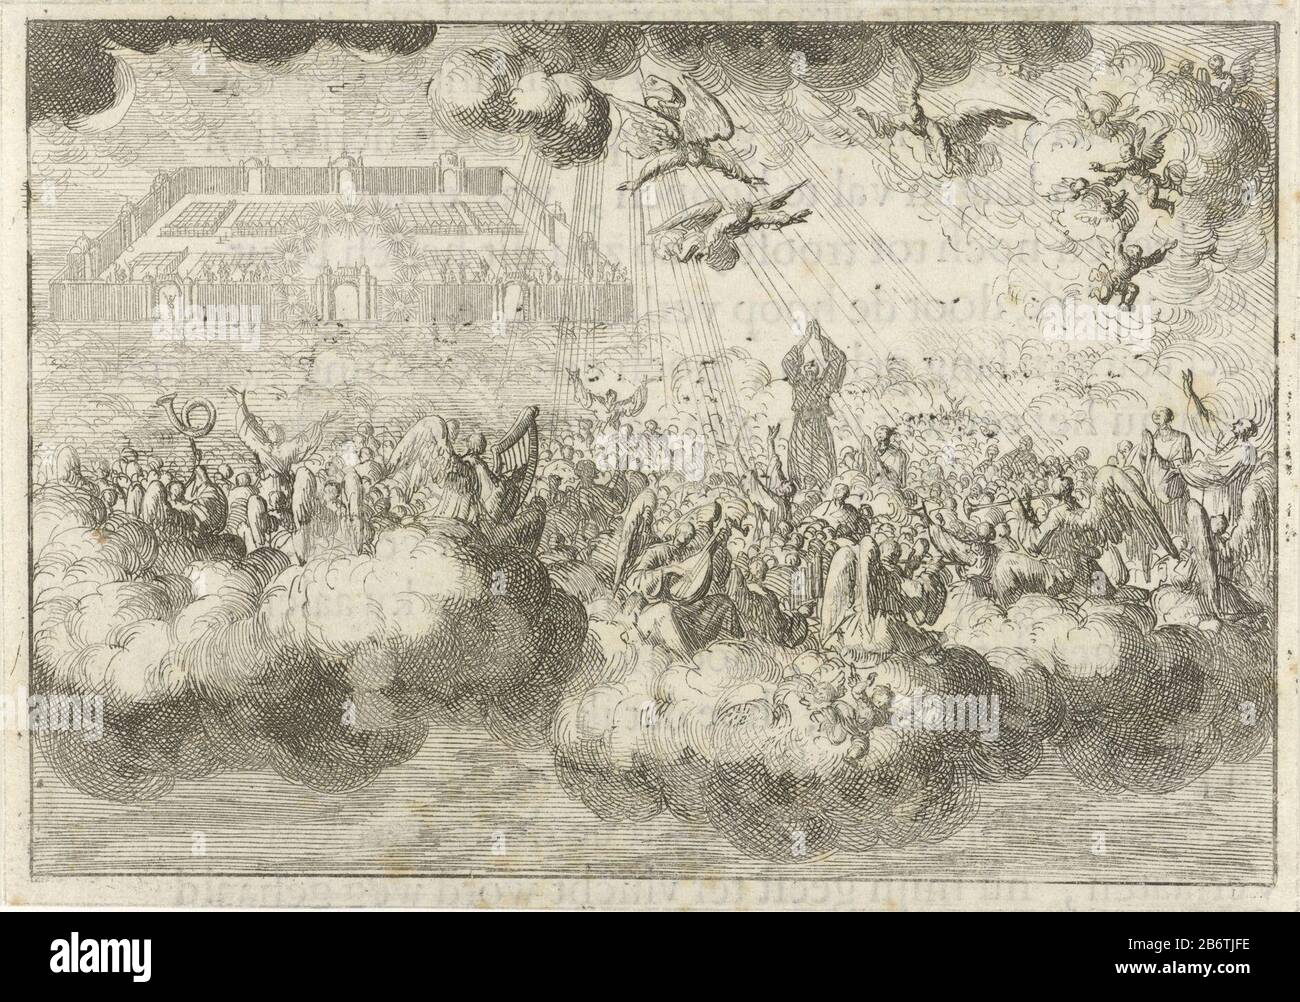 Het hemels Jeruzalem met lofzingende engelen en verlosten The election has with the help of angels, the heavenly Jerusalem bereikt. Manufacturer : printmaker Jan Luyken (listed building) editor: David RuarusPlaats manufacture: Amsterdam Date: 1687 Physical features: etching and text in letterpress on verso material: paper Technique: etching / printing sizes: leaf: h 92 mm × W 132 mmToelichtingIllustratie out: Ruarus, David. Of the world's demise. Amsterdam: David Ruarus, 1687, p. 38. Subject: heaven represented as a city last judgment Stock Photo